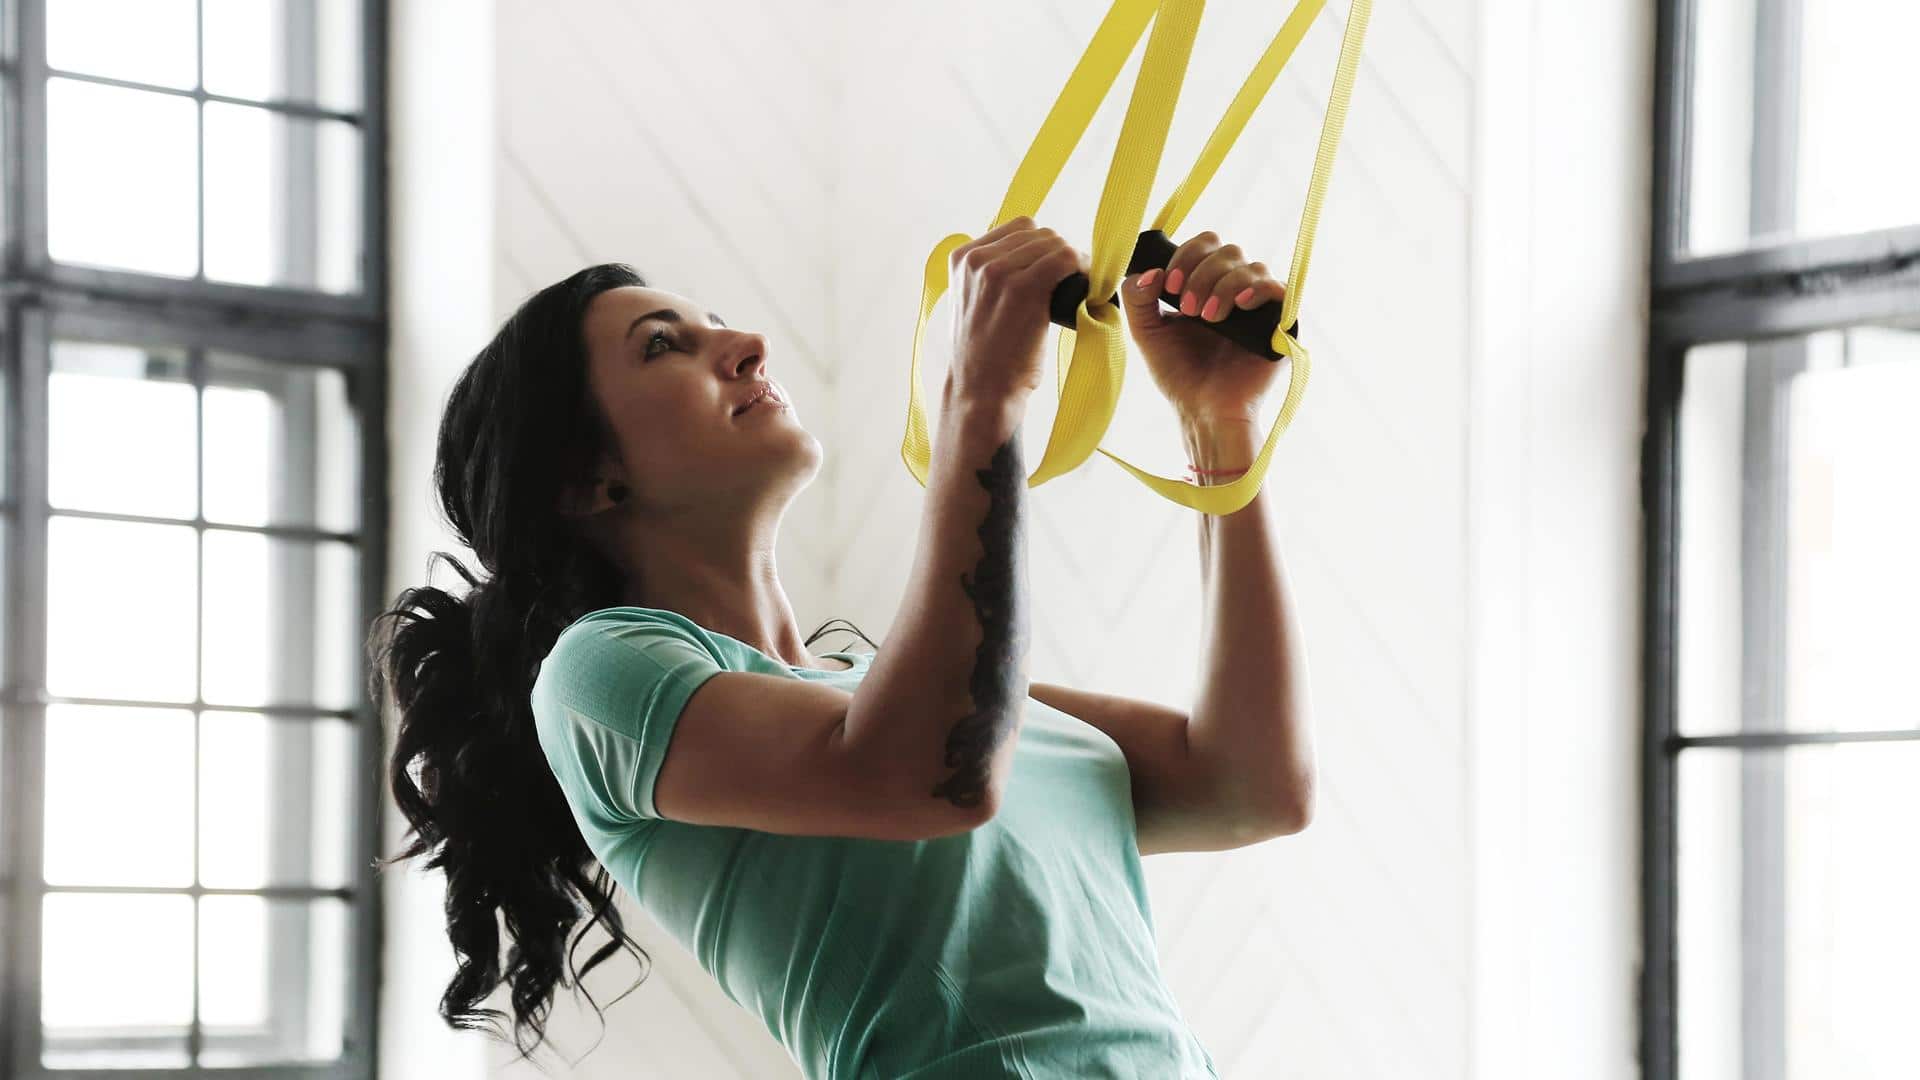 Transform your body with these full-body TRX trainer exercises